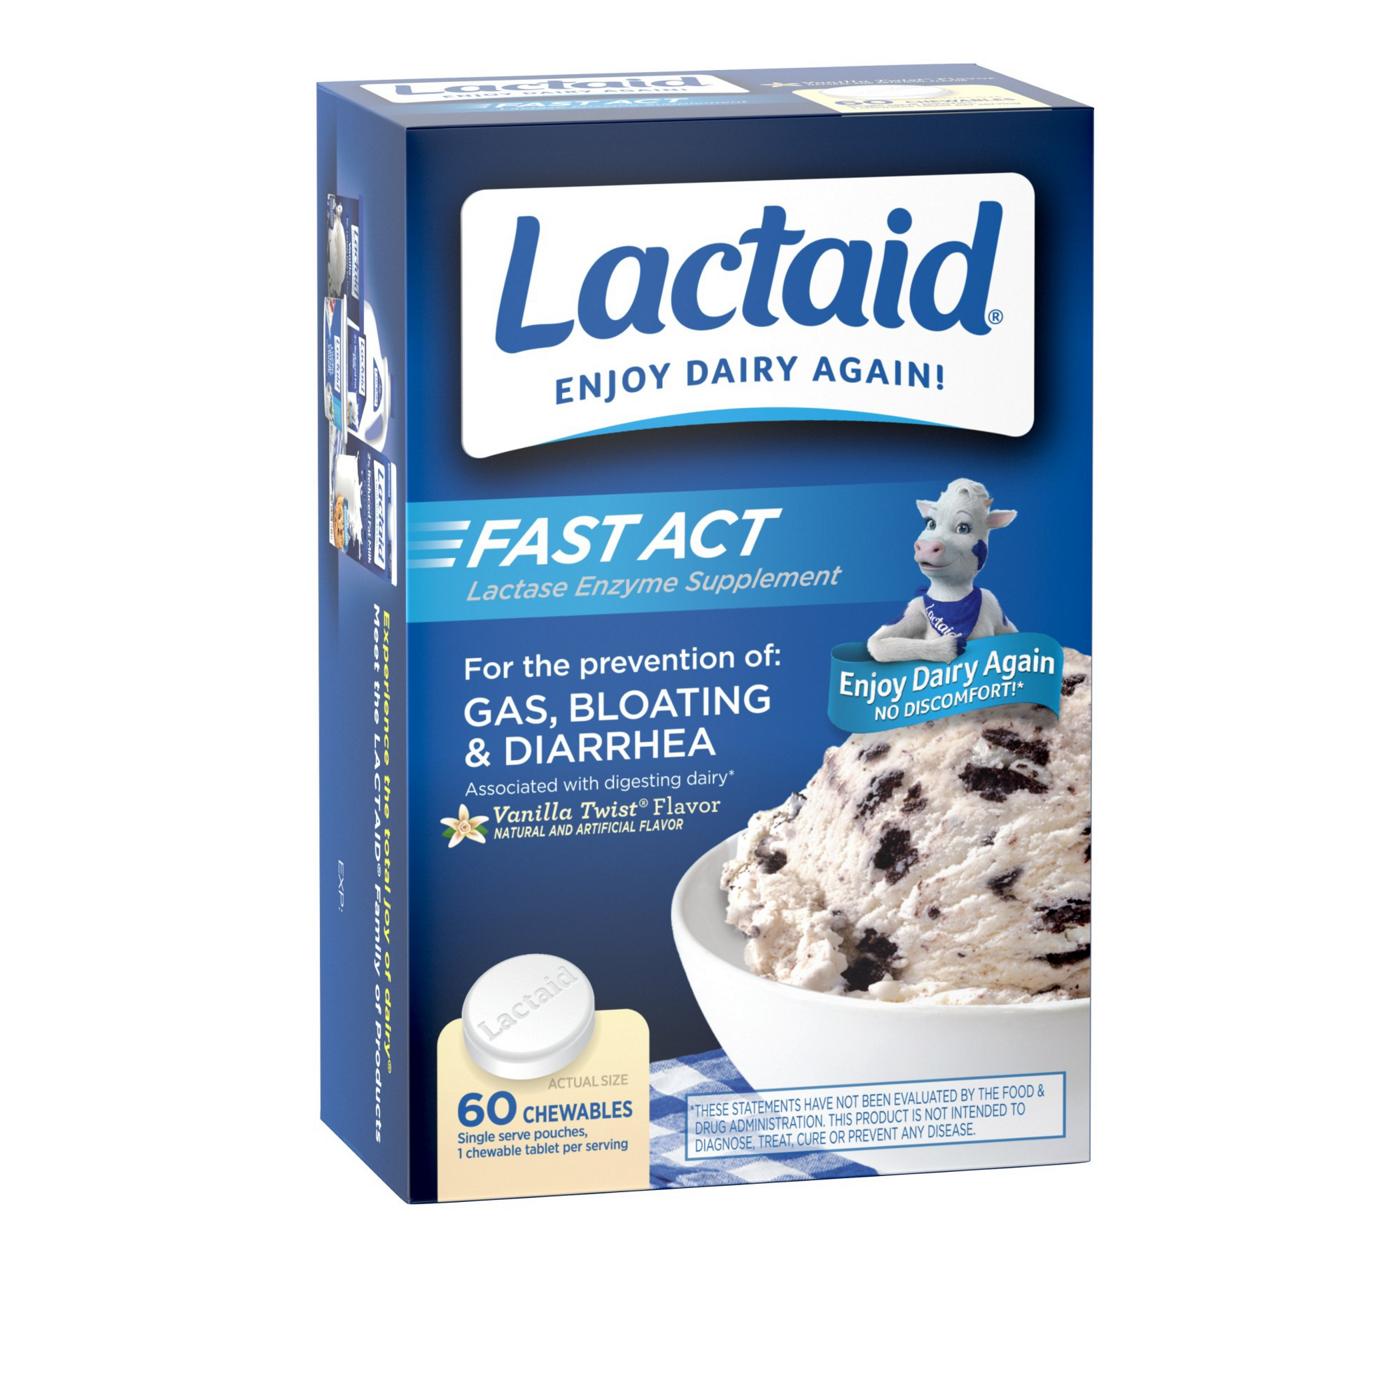 Lactaid Fast Act Chewables - Vanilla Twist; image 5 of 5